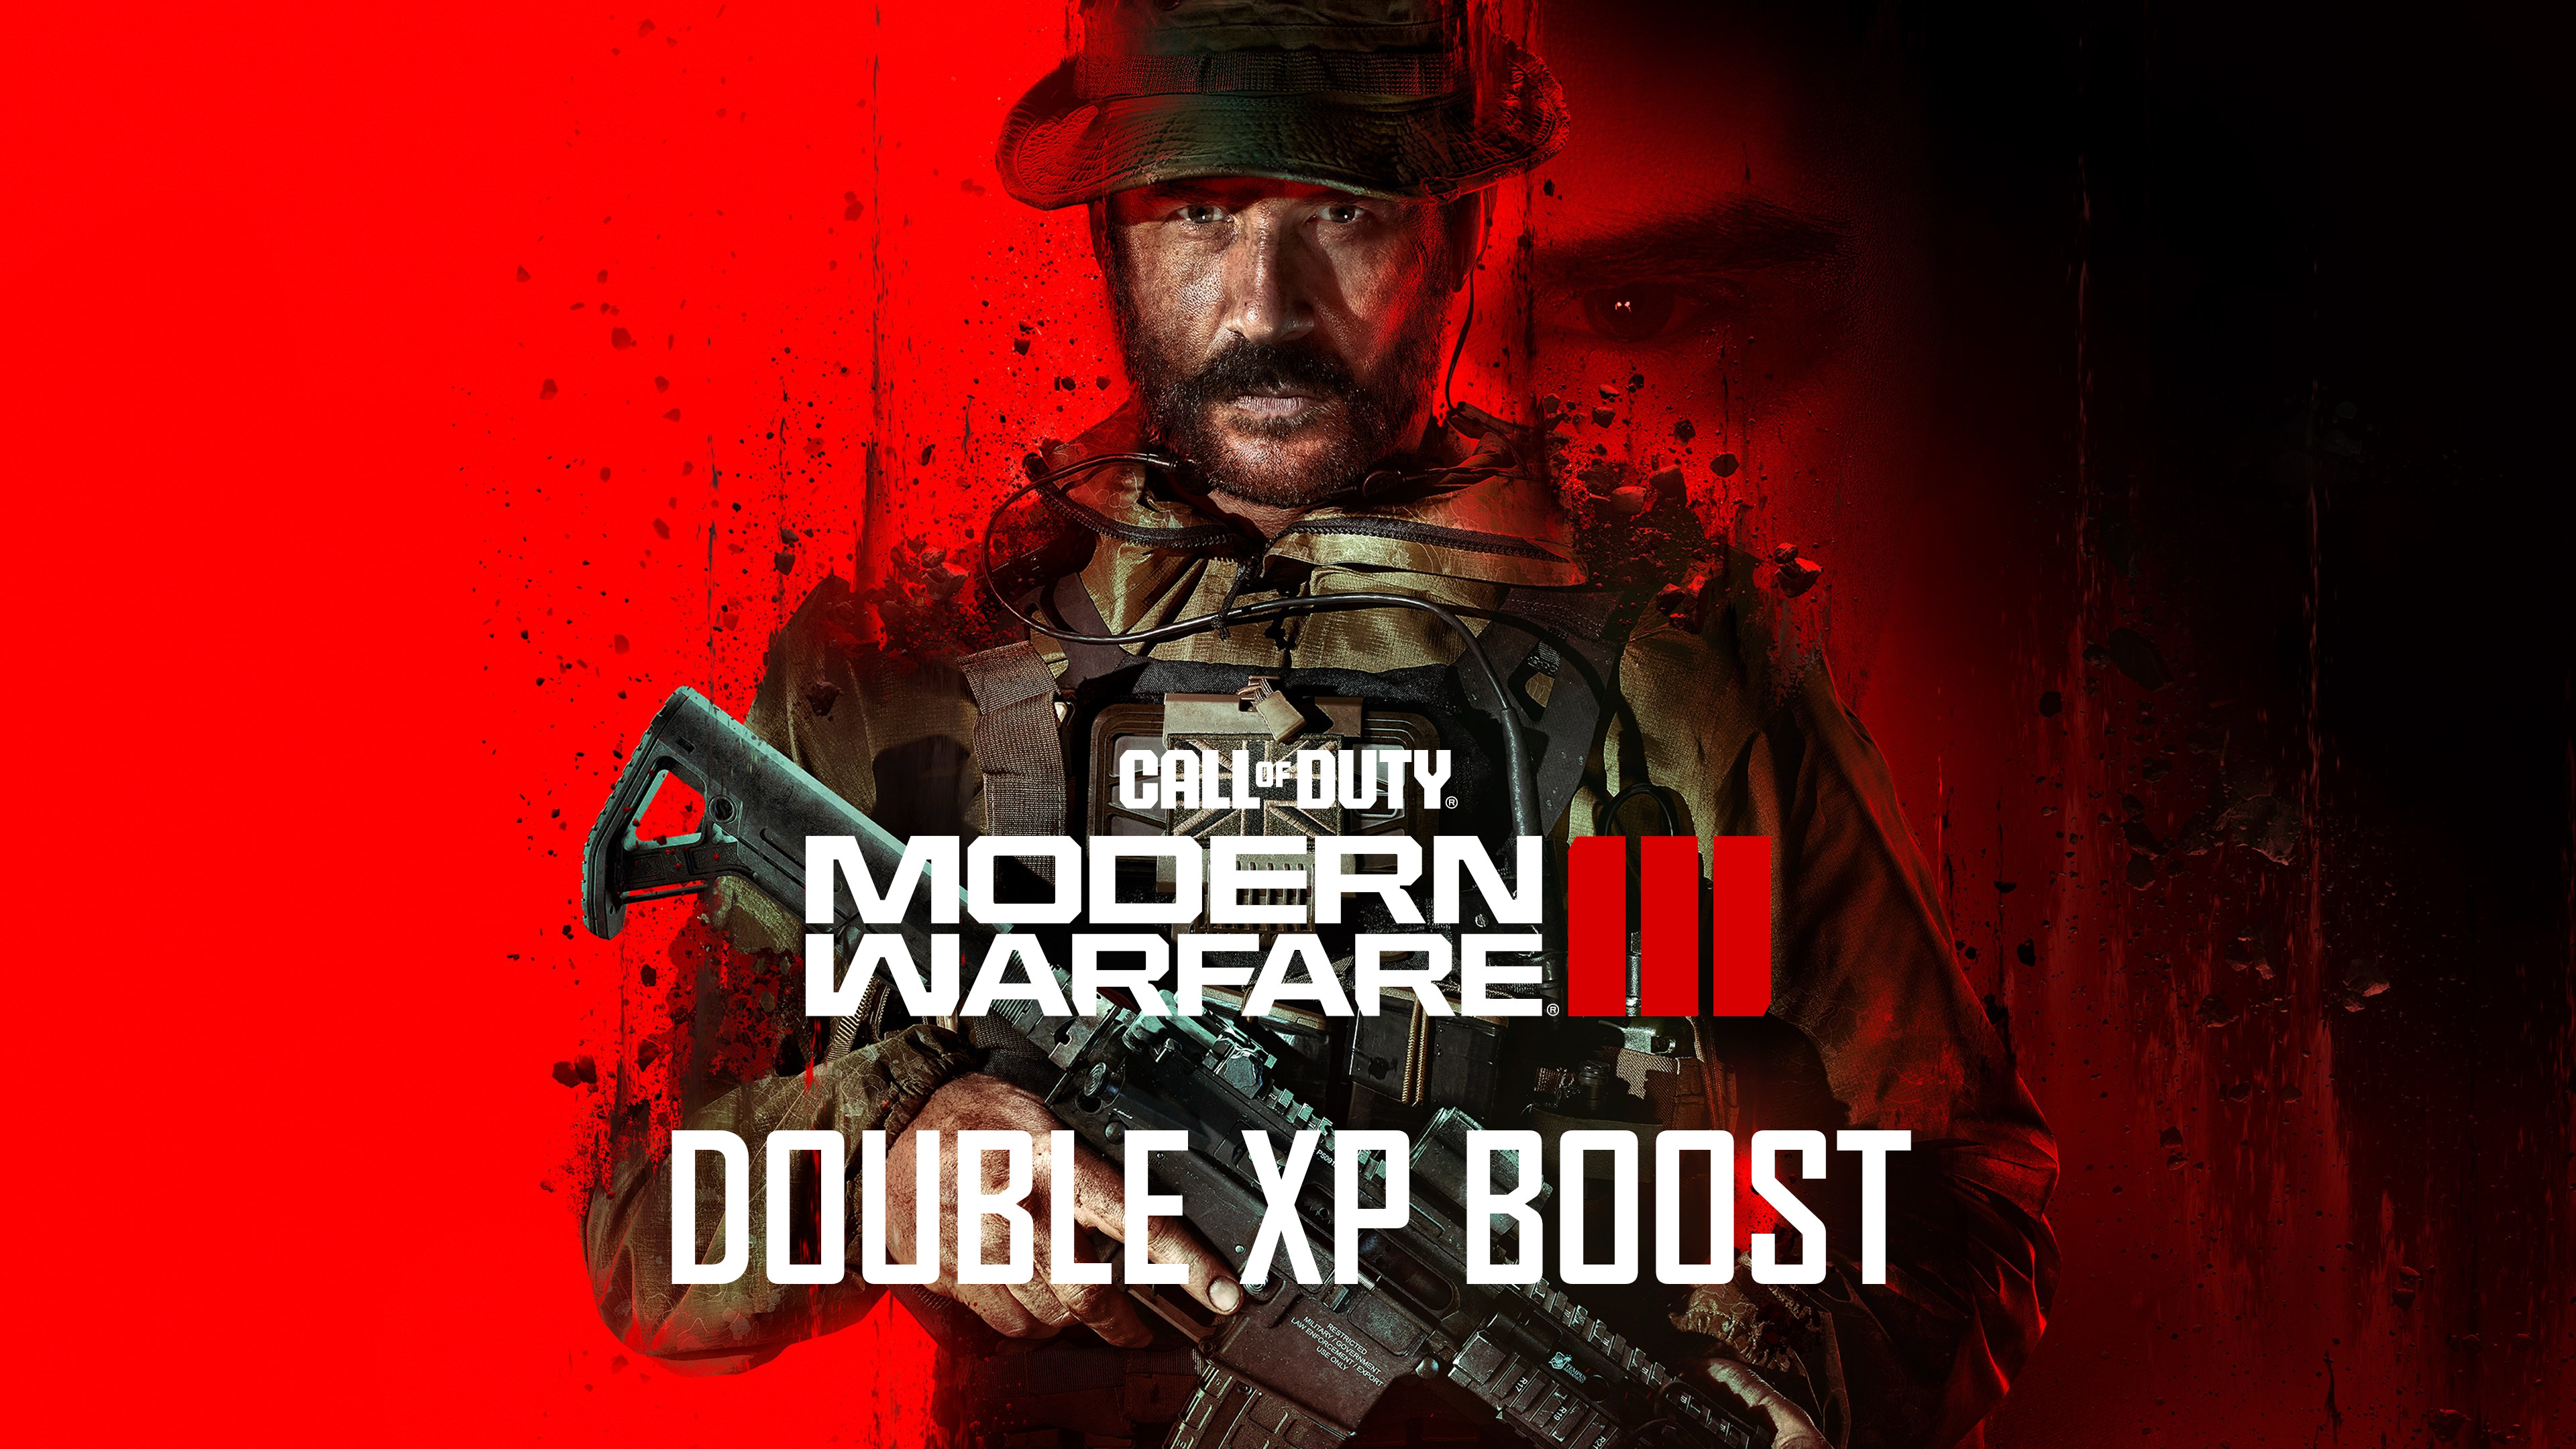 Call of Duty: Modern Warfare III - 15 Hours Double XP Boost PC/PS4/PS5/XBOX One/Series X|S CD Key $14.68